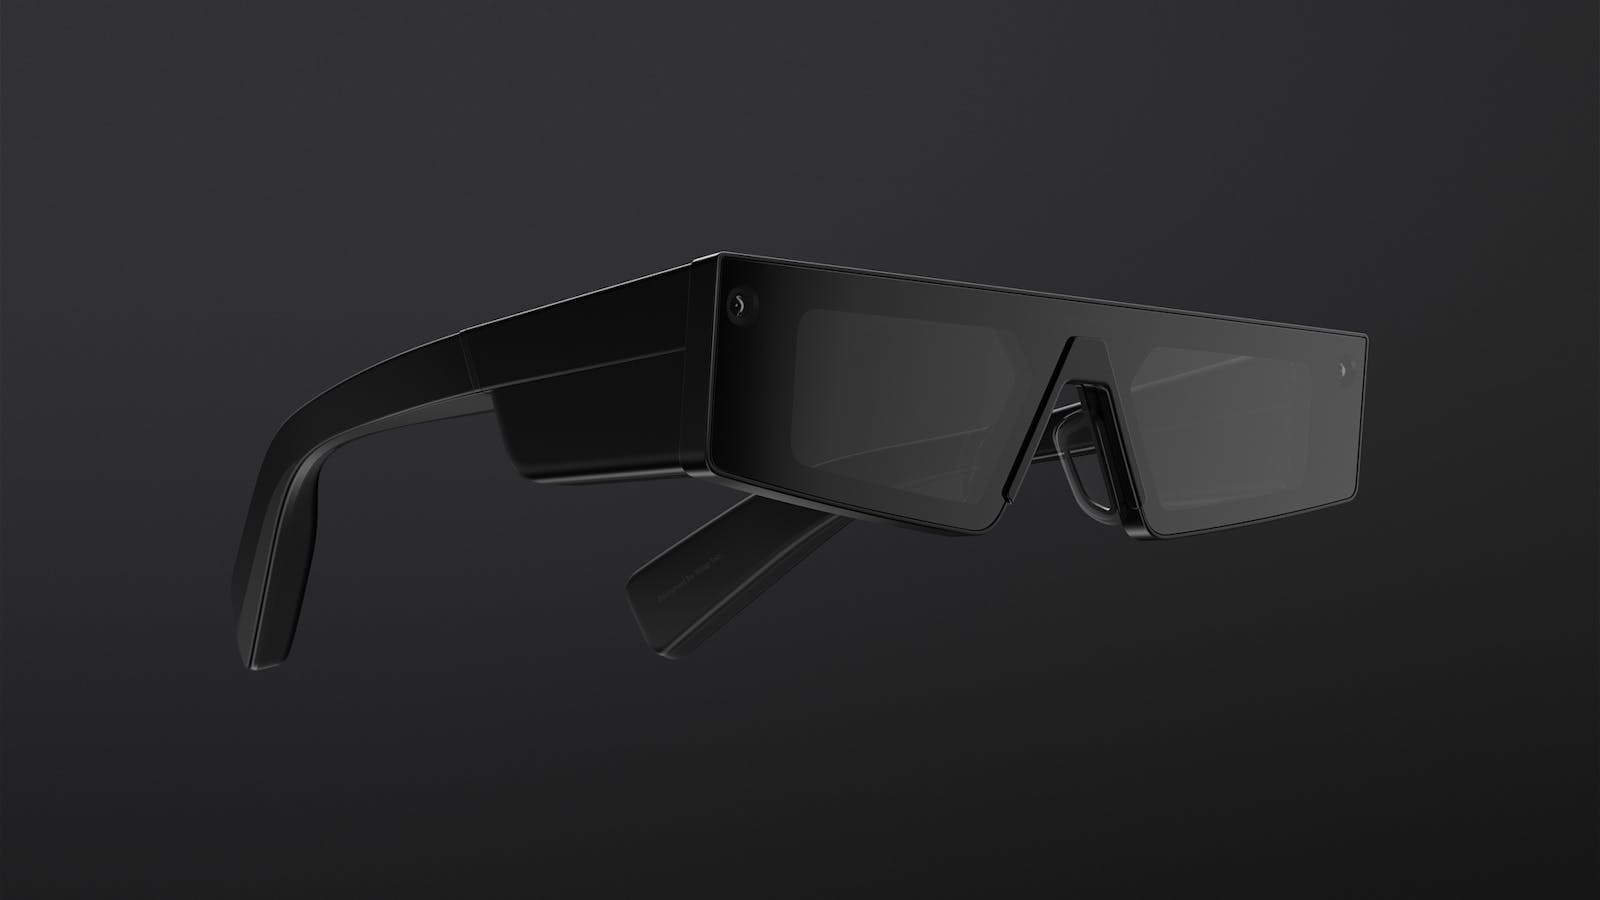 The developer-only AR Spectacles revealed in May 2021. Photo: Snap.